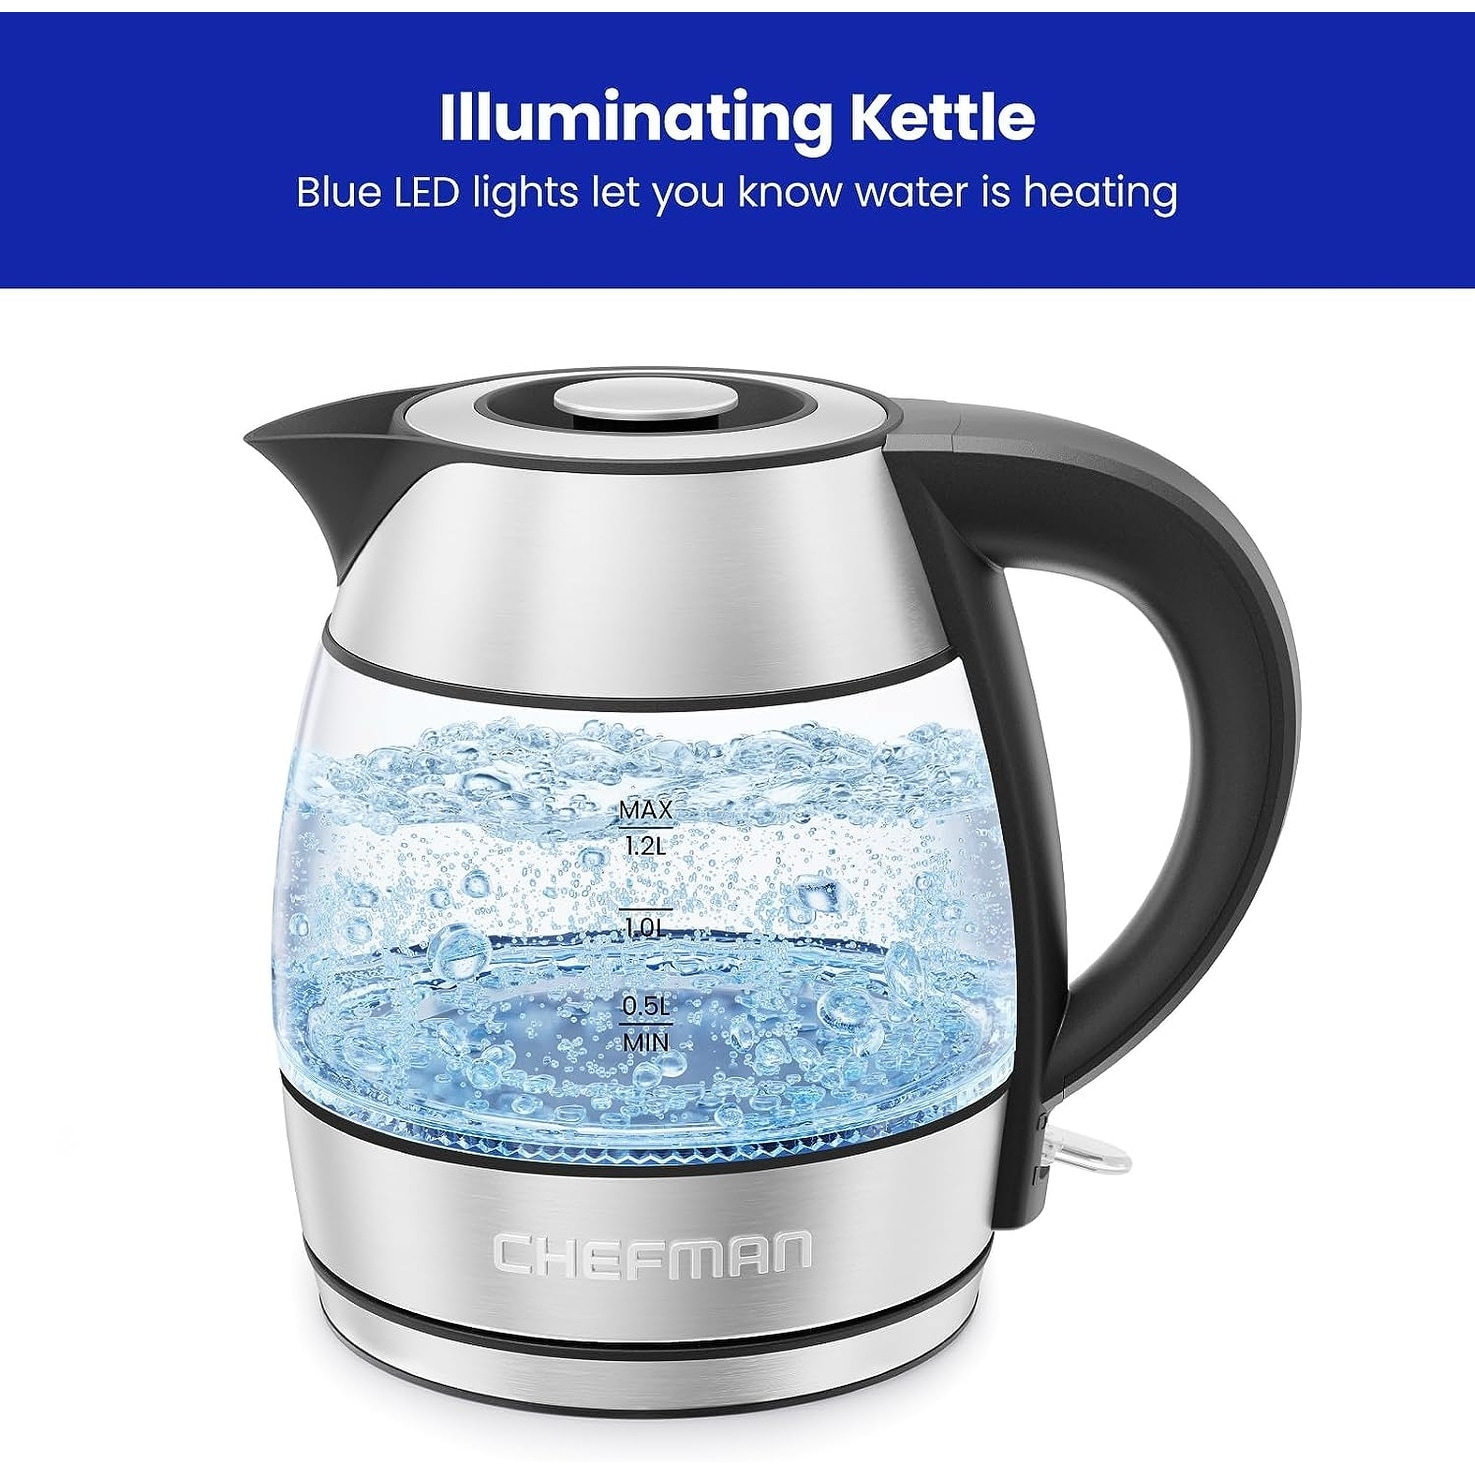 https://ak1.ostkcdn.com/images/products/is/images/direct/09e3f65e2d3002d580e20a30eed01253e542f8ec/1.2L-Electric-Tea-Kettle-with-LED-Lights%2C-Automatic-Shut-Off%2C-Removable-Lid.jpg